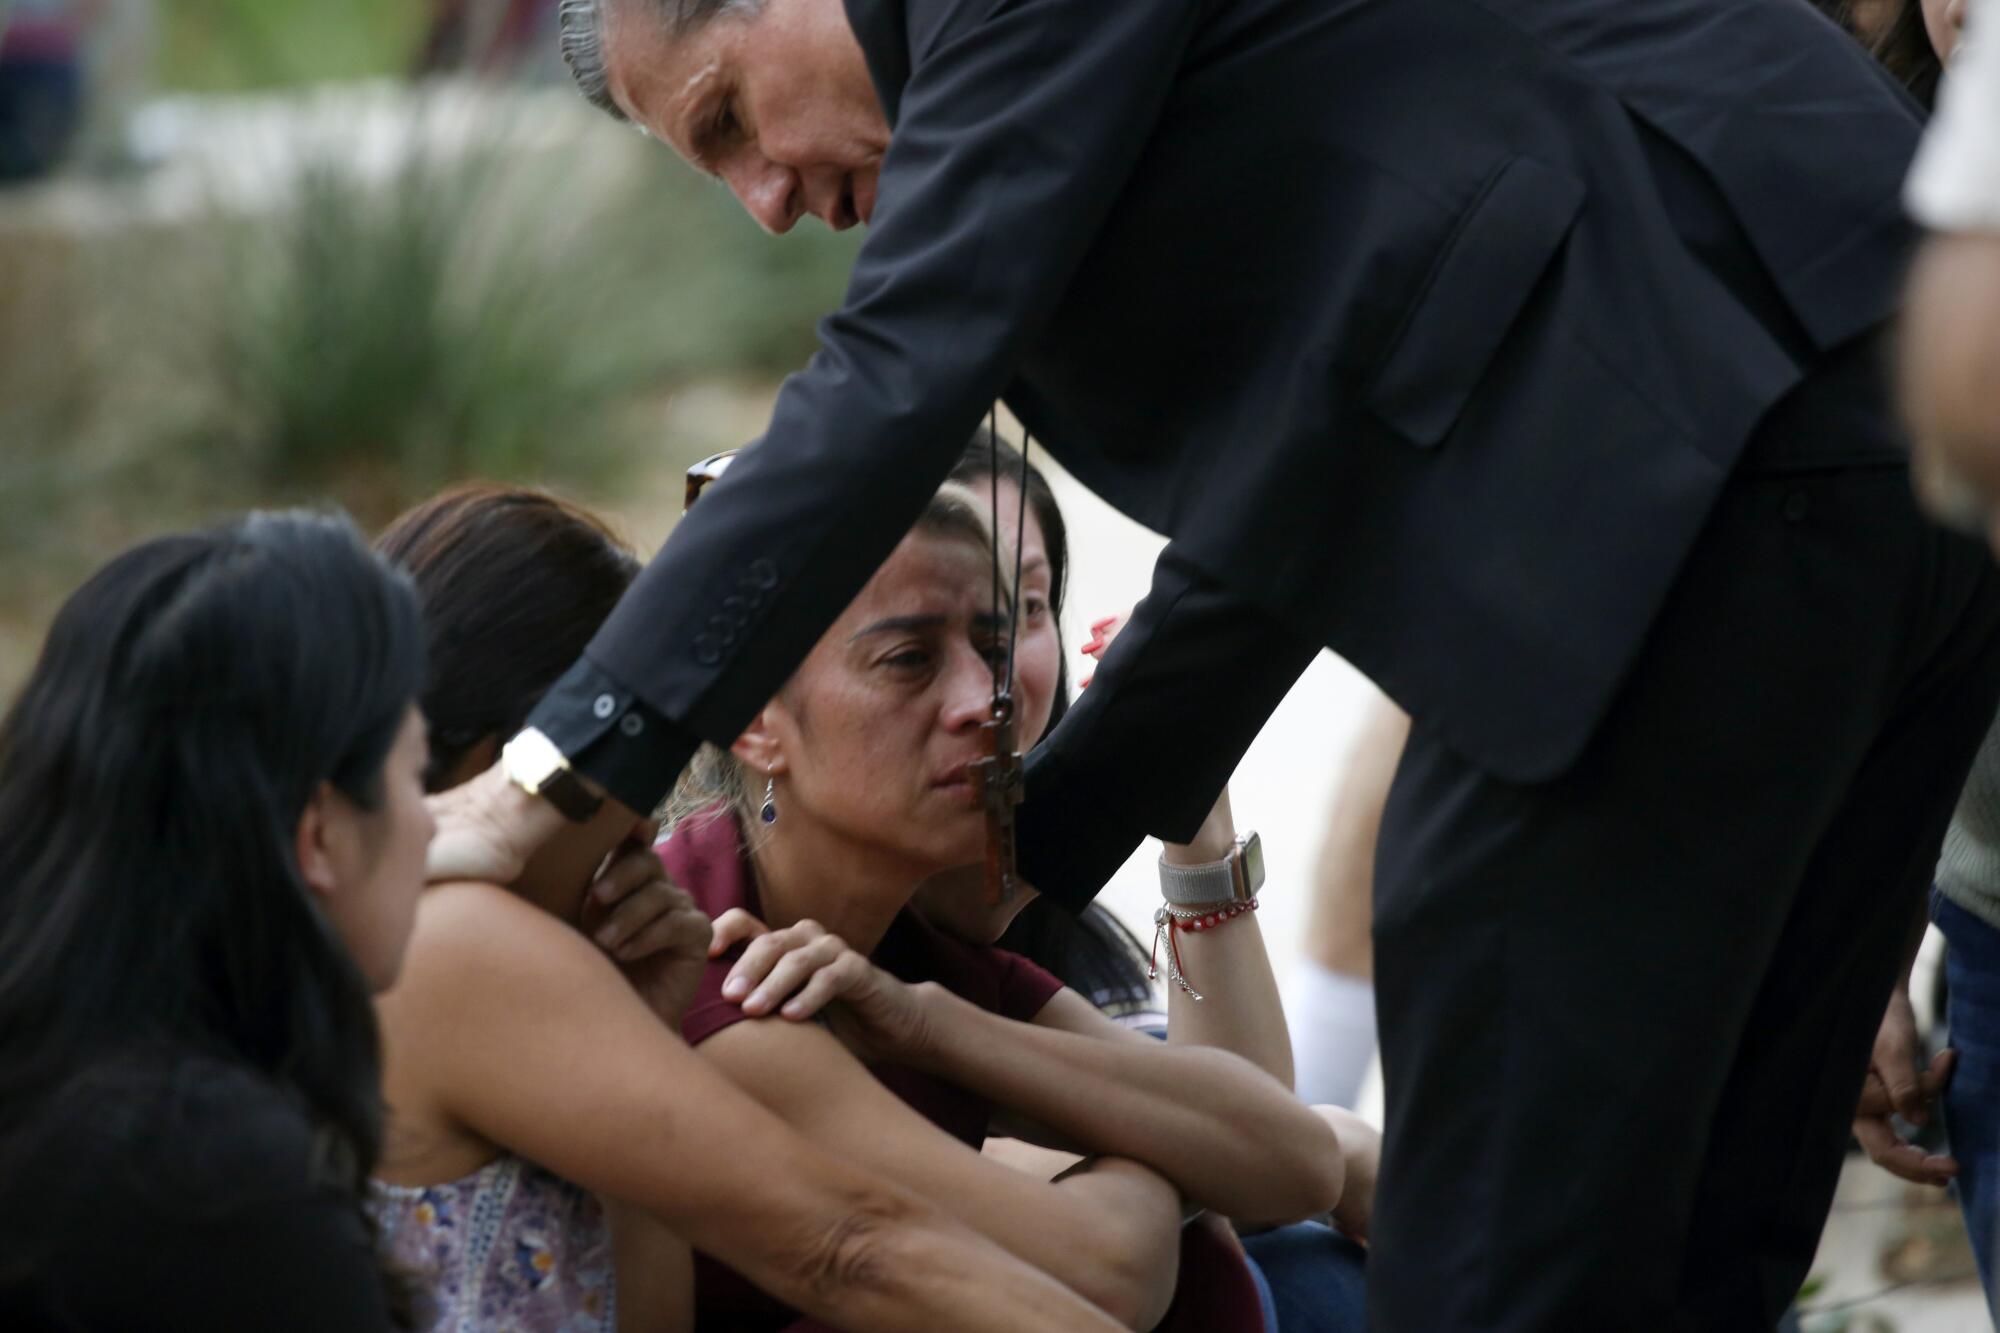 A man in a dark suit reaches out to several women who are upset